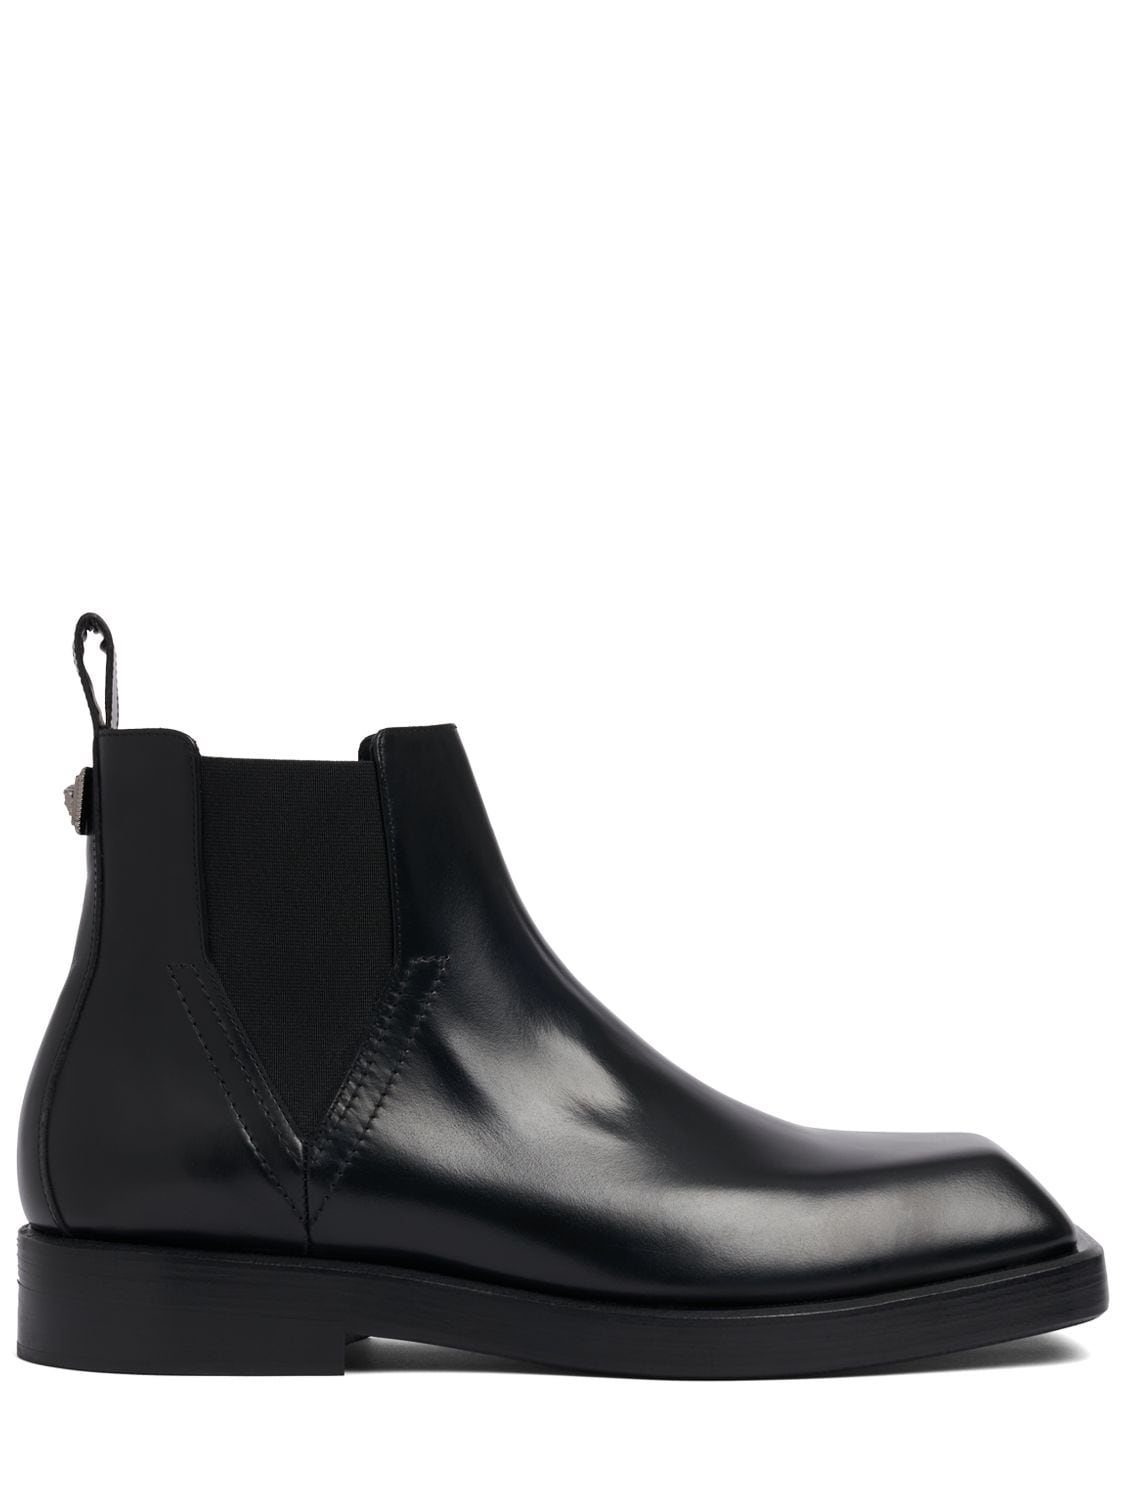 VERSACE SQUARED TOE LEATHER CHELSEA BOOTS